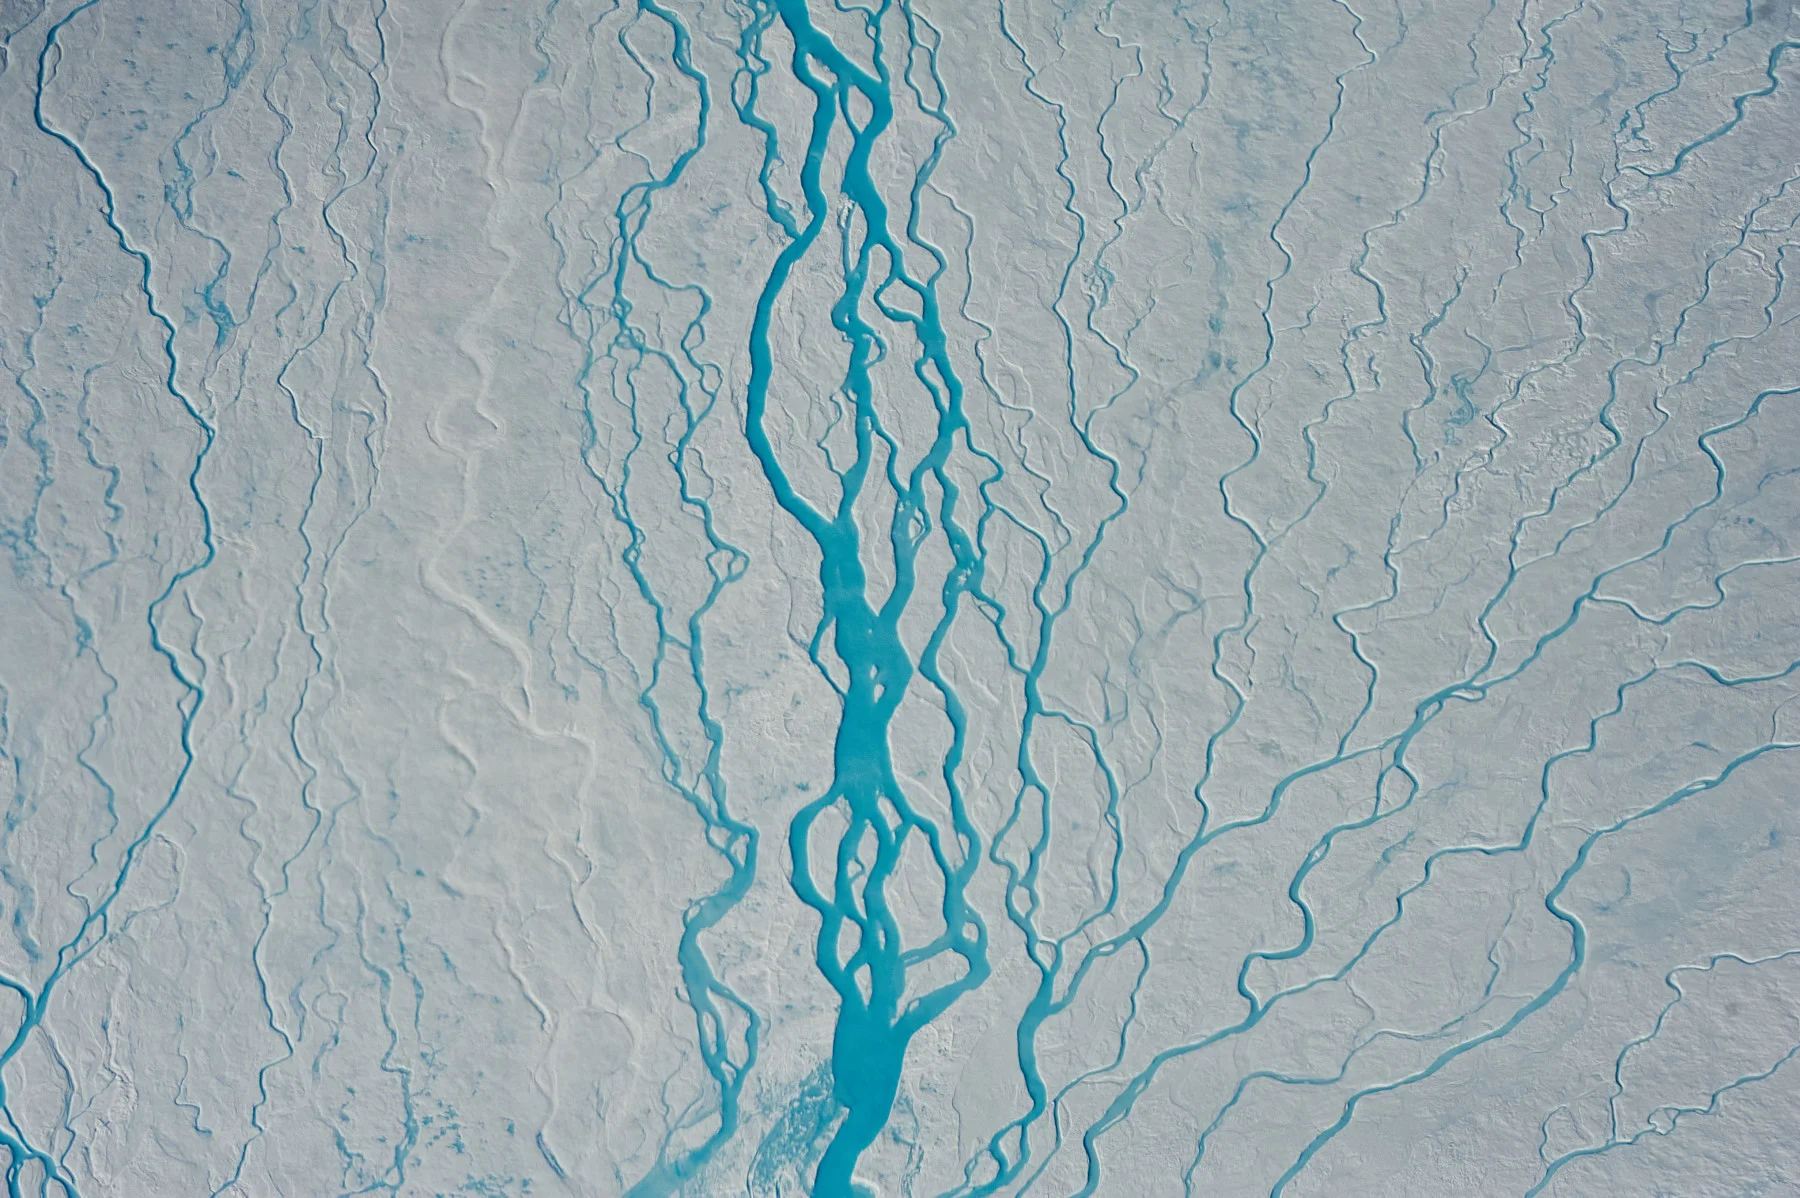 Greenland Ice Sheet experiencing warmest temperatures in 1,000 years, study says